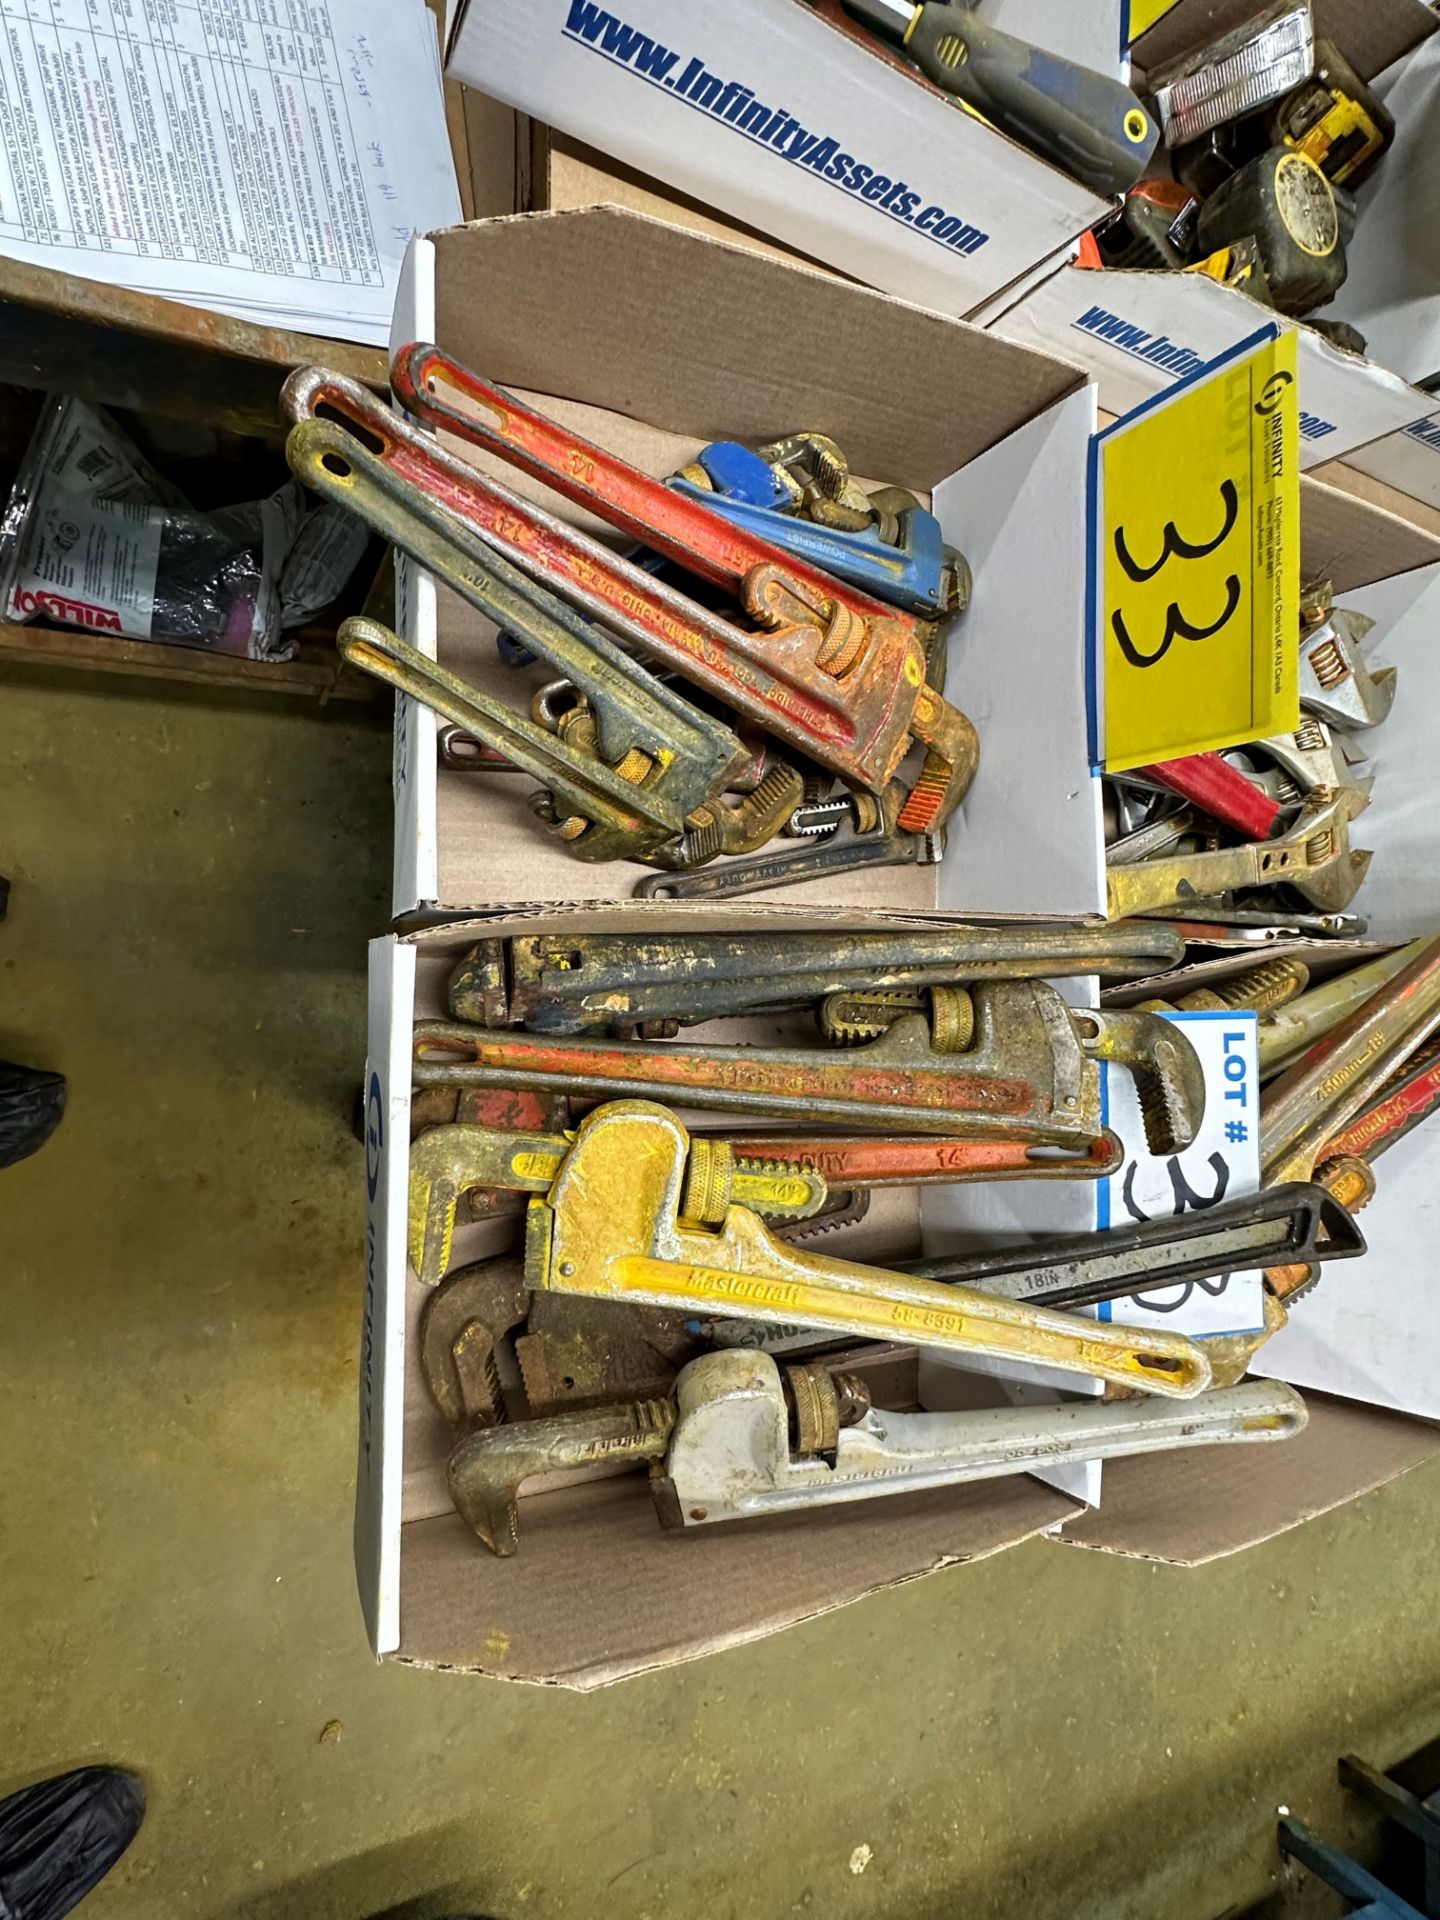 LOT OF (6) BOXES OF PIPE WRENCHES, ADJUSTABLE WRENCHES, MASTERCRAFT WRATCH WRENCHES PUNCHES, ETC. - Image 4 of 4